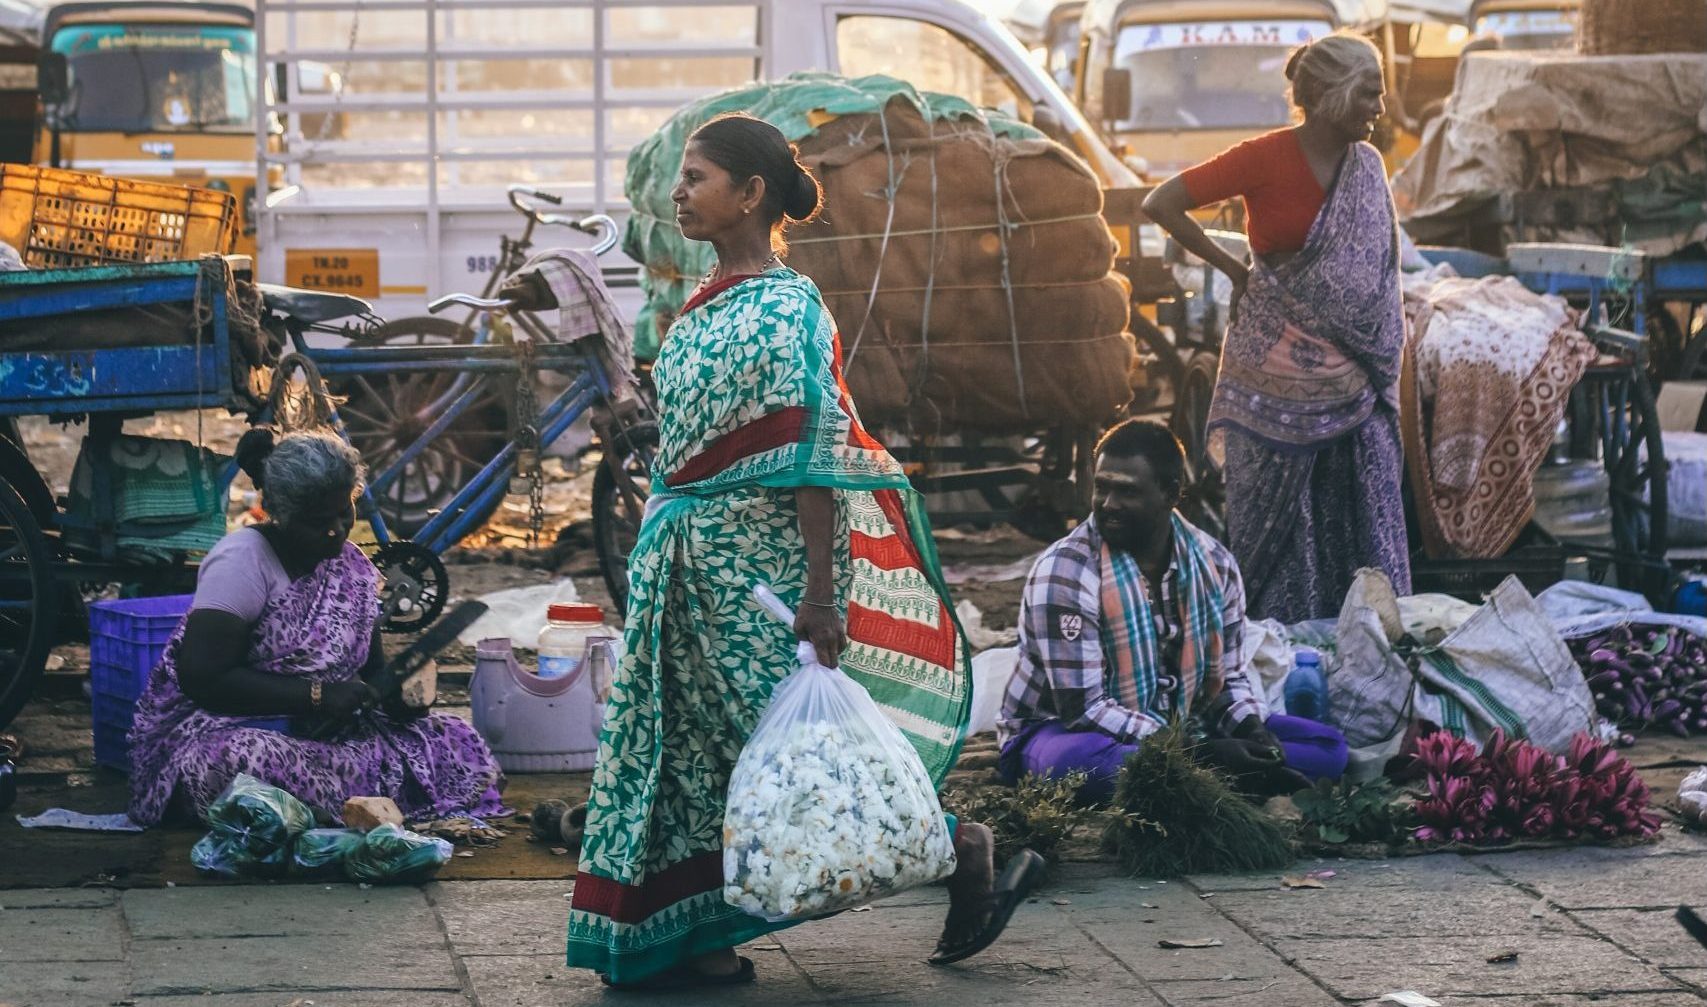 Woman walking along the street in India